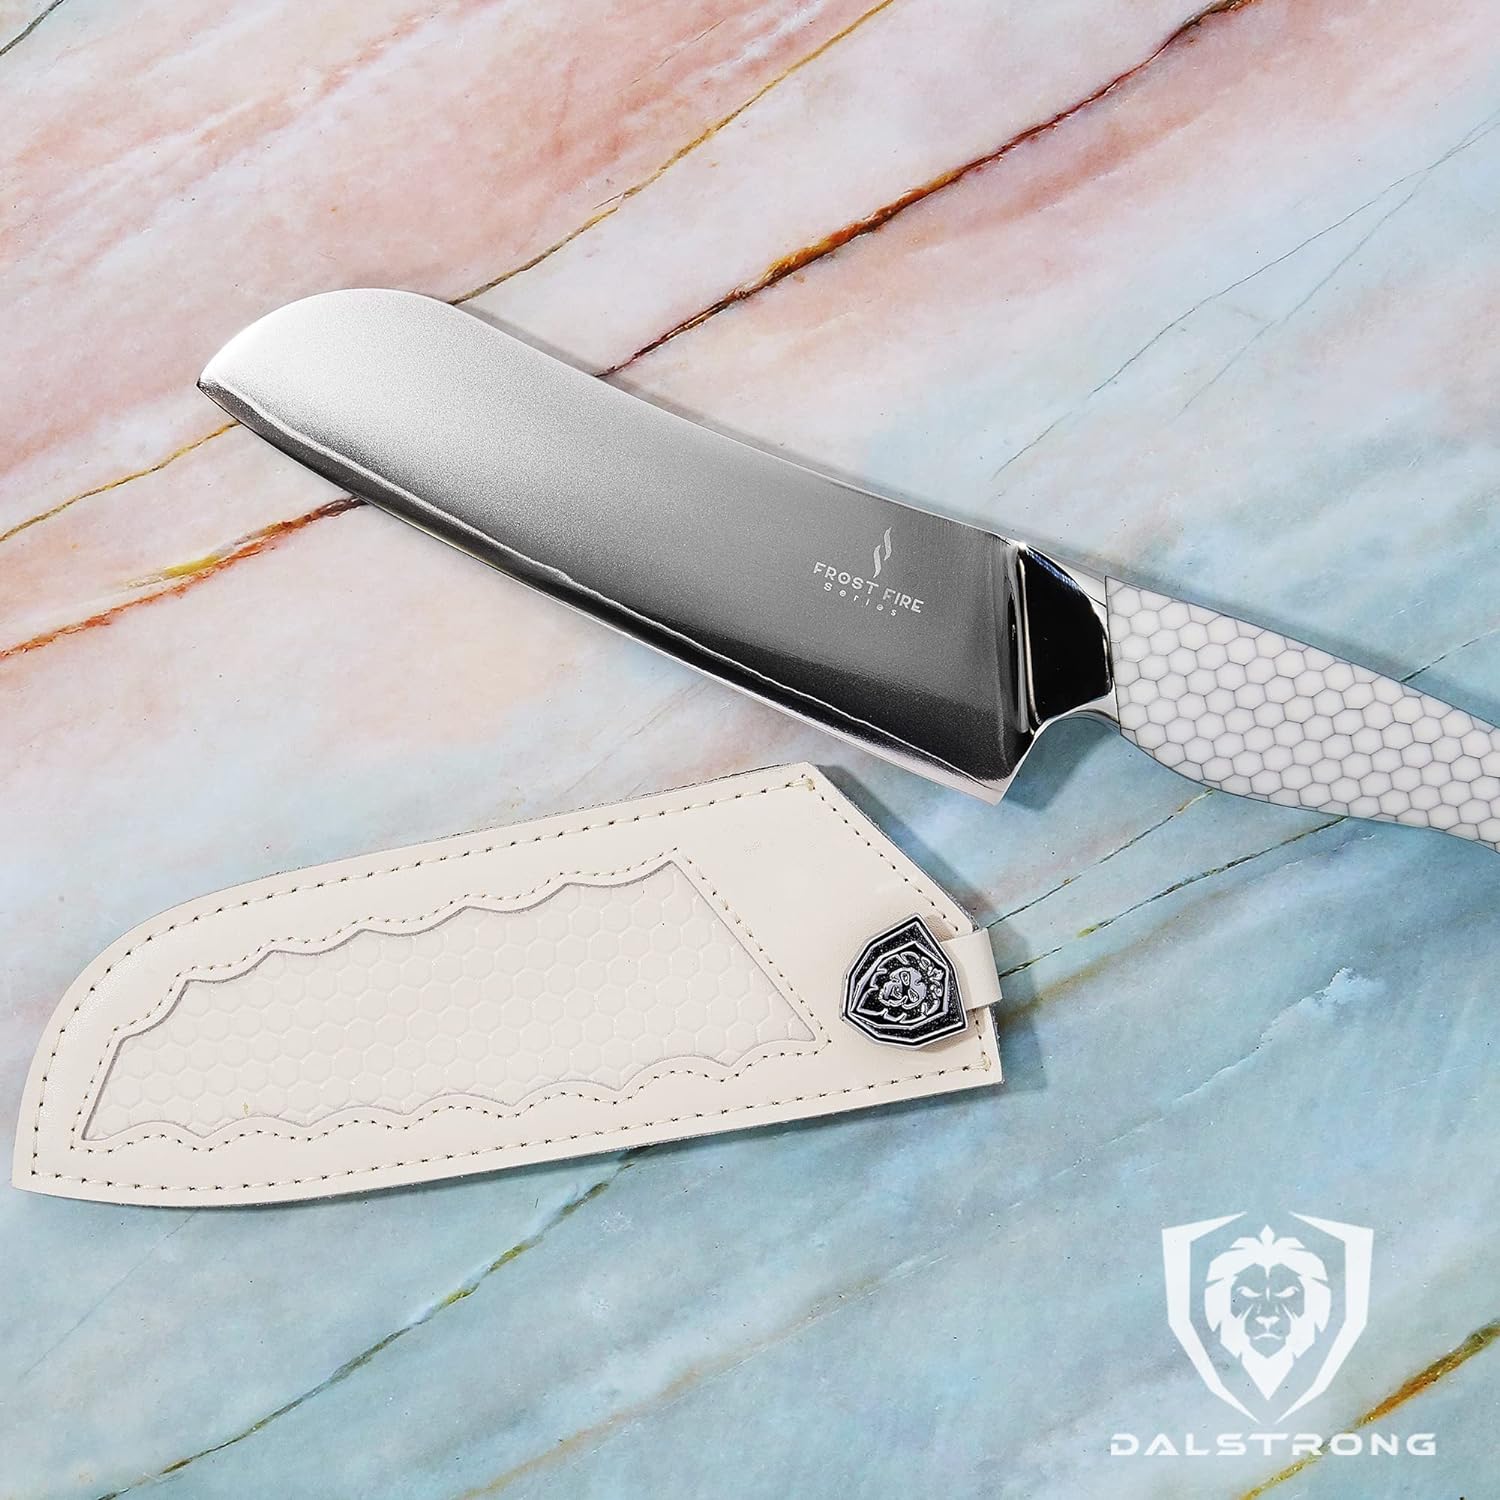 Dalstrong Nakiri Knife - 6.5 inch - Frost Fire Series - High Chromium 10CR15MOV Stainless Steel Vegetable Knife - Frosted Sandblast Finish - White Honeycomb Handle - Leather Sheath - NSF Certified